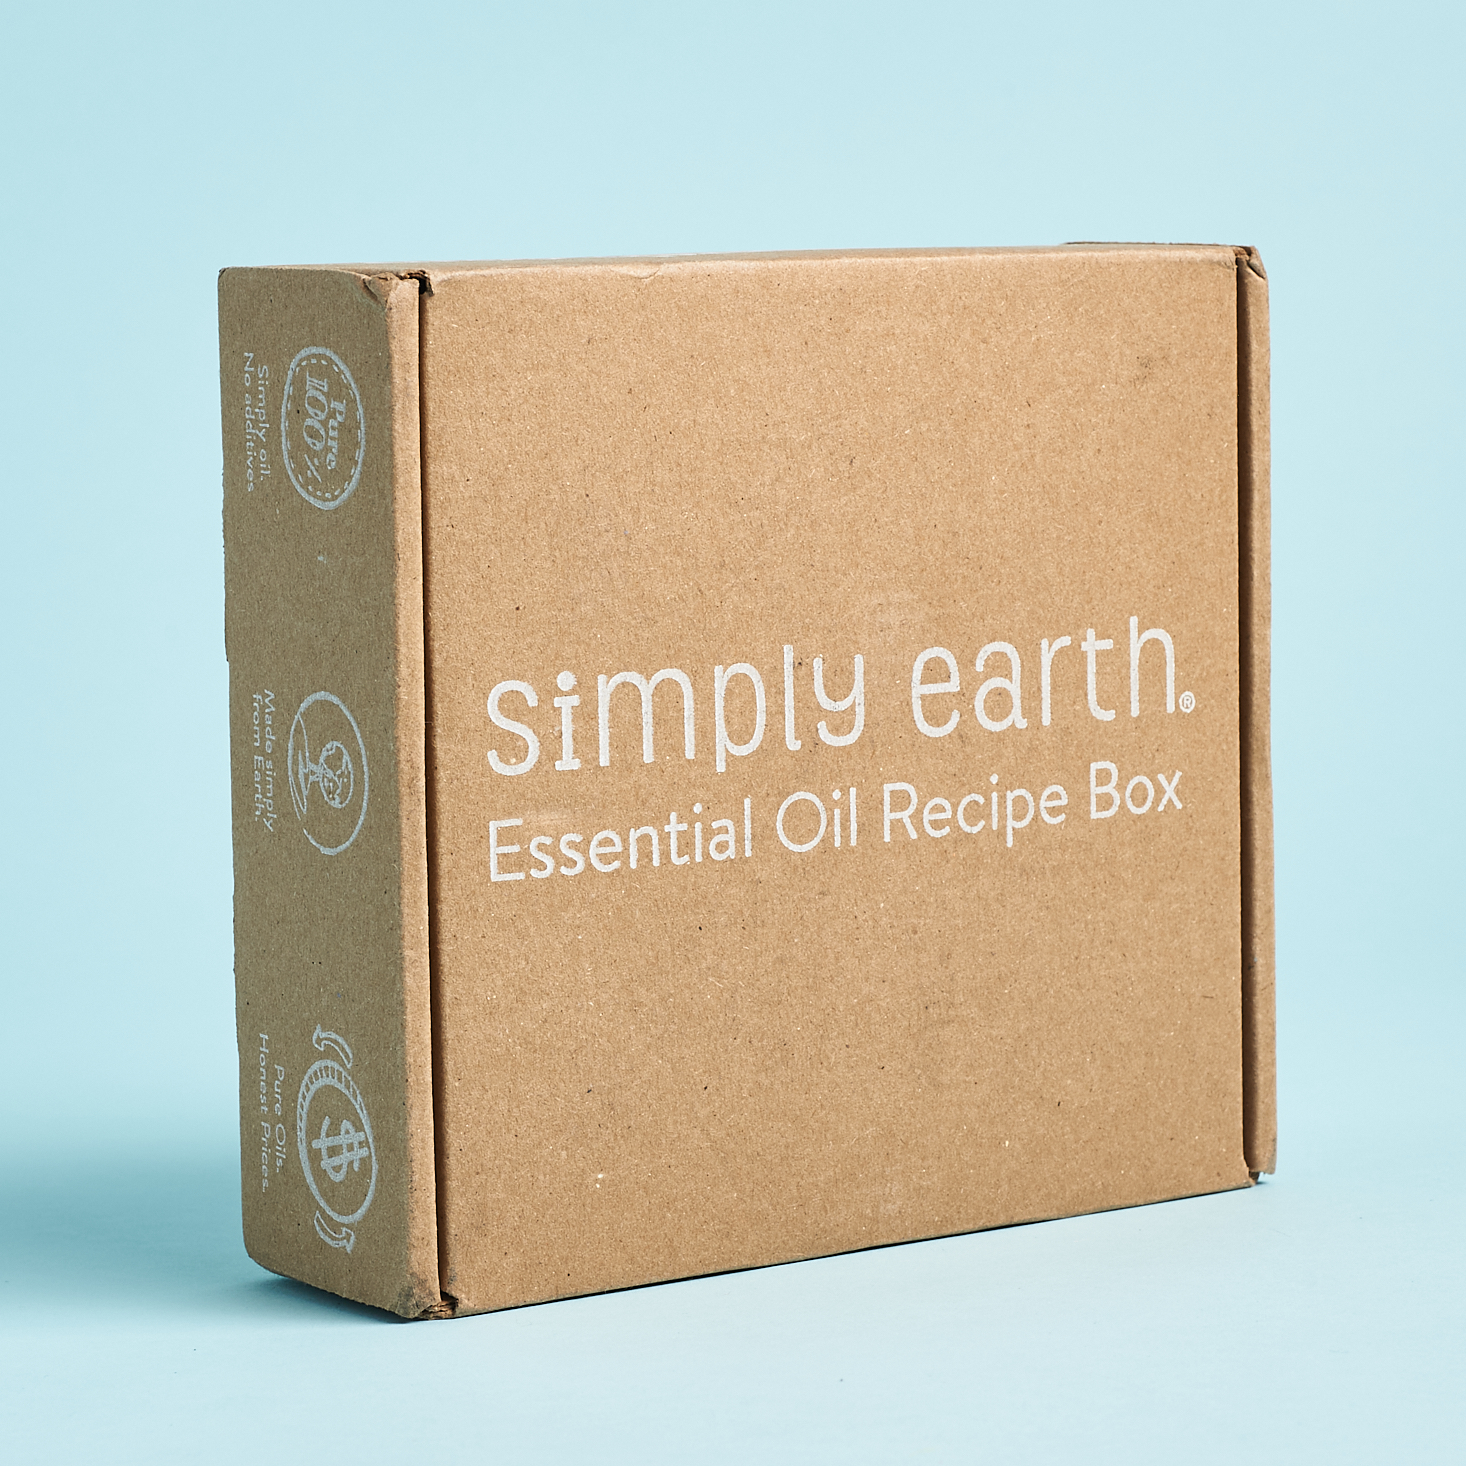 Simply Earth Essential Oil Recipe Box Review + Coupon – July 2020